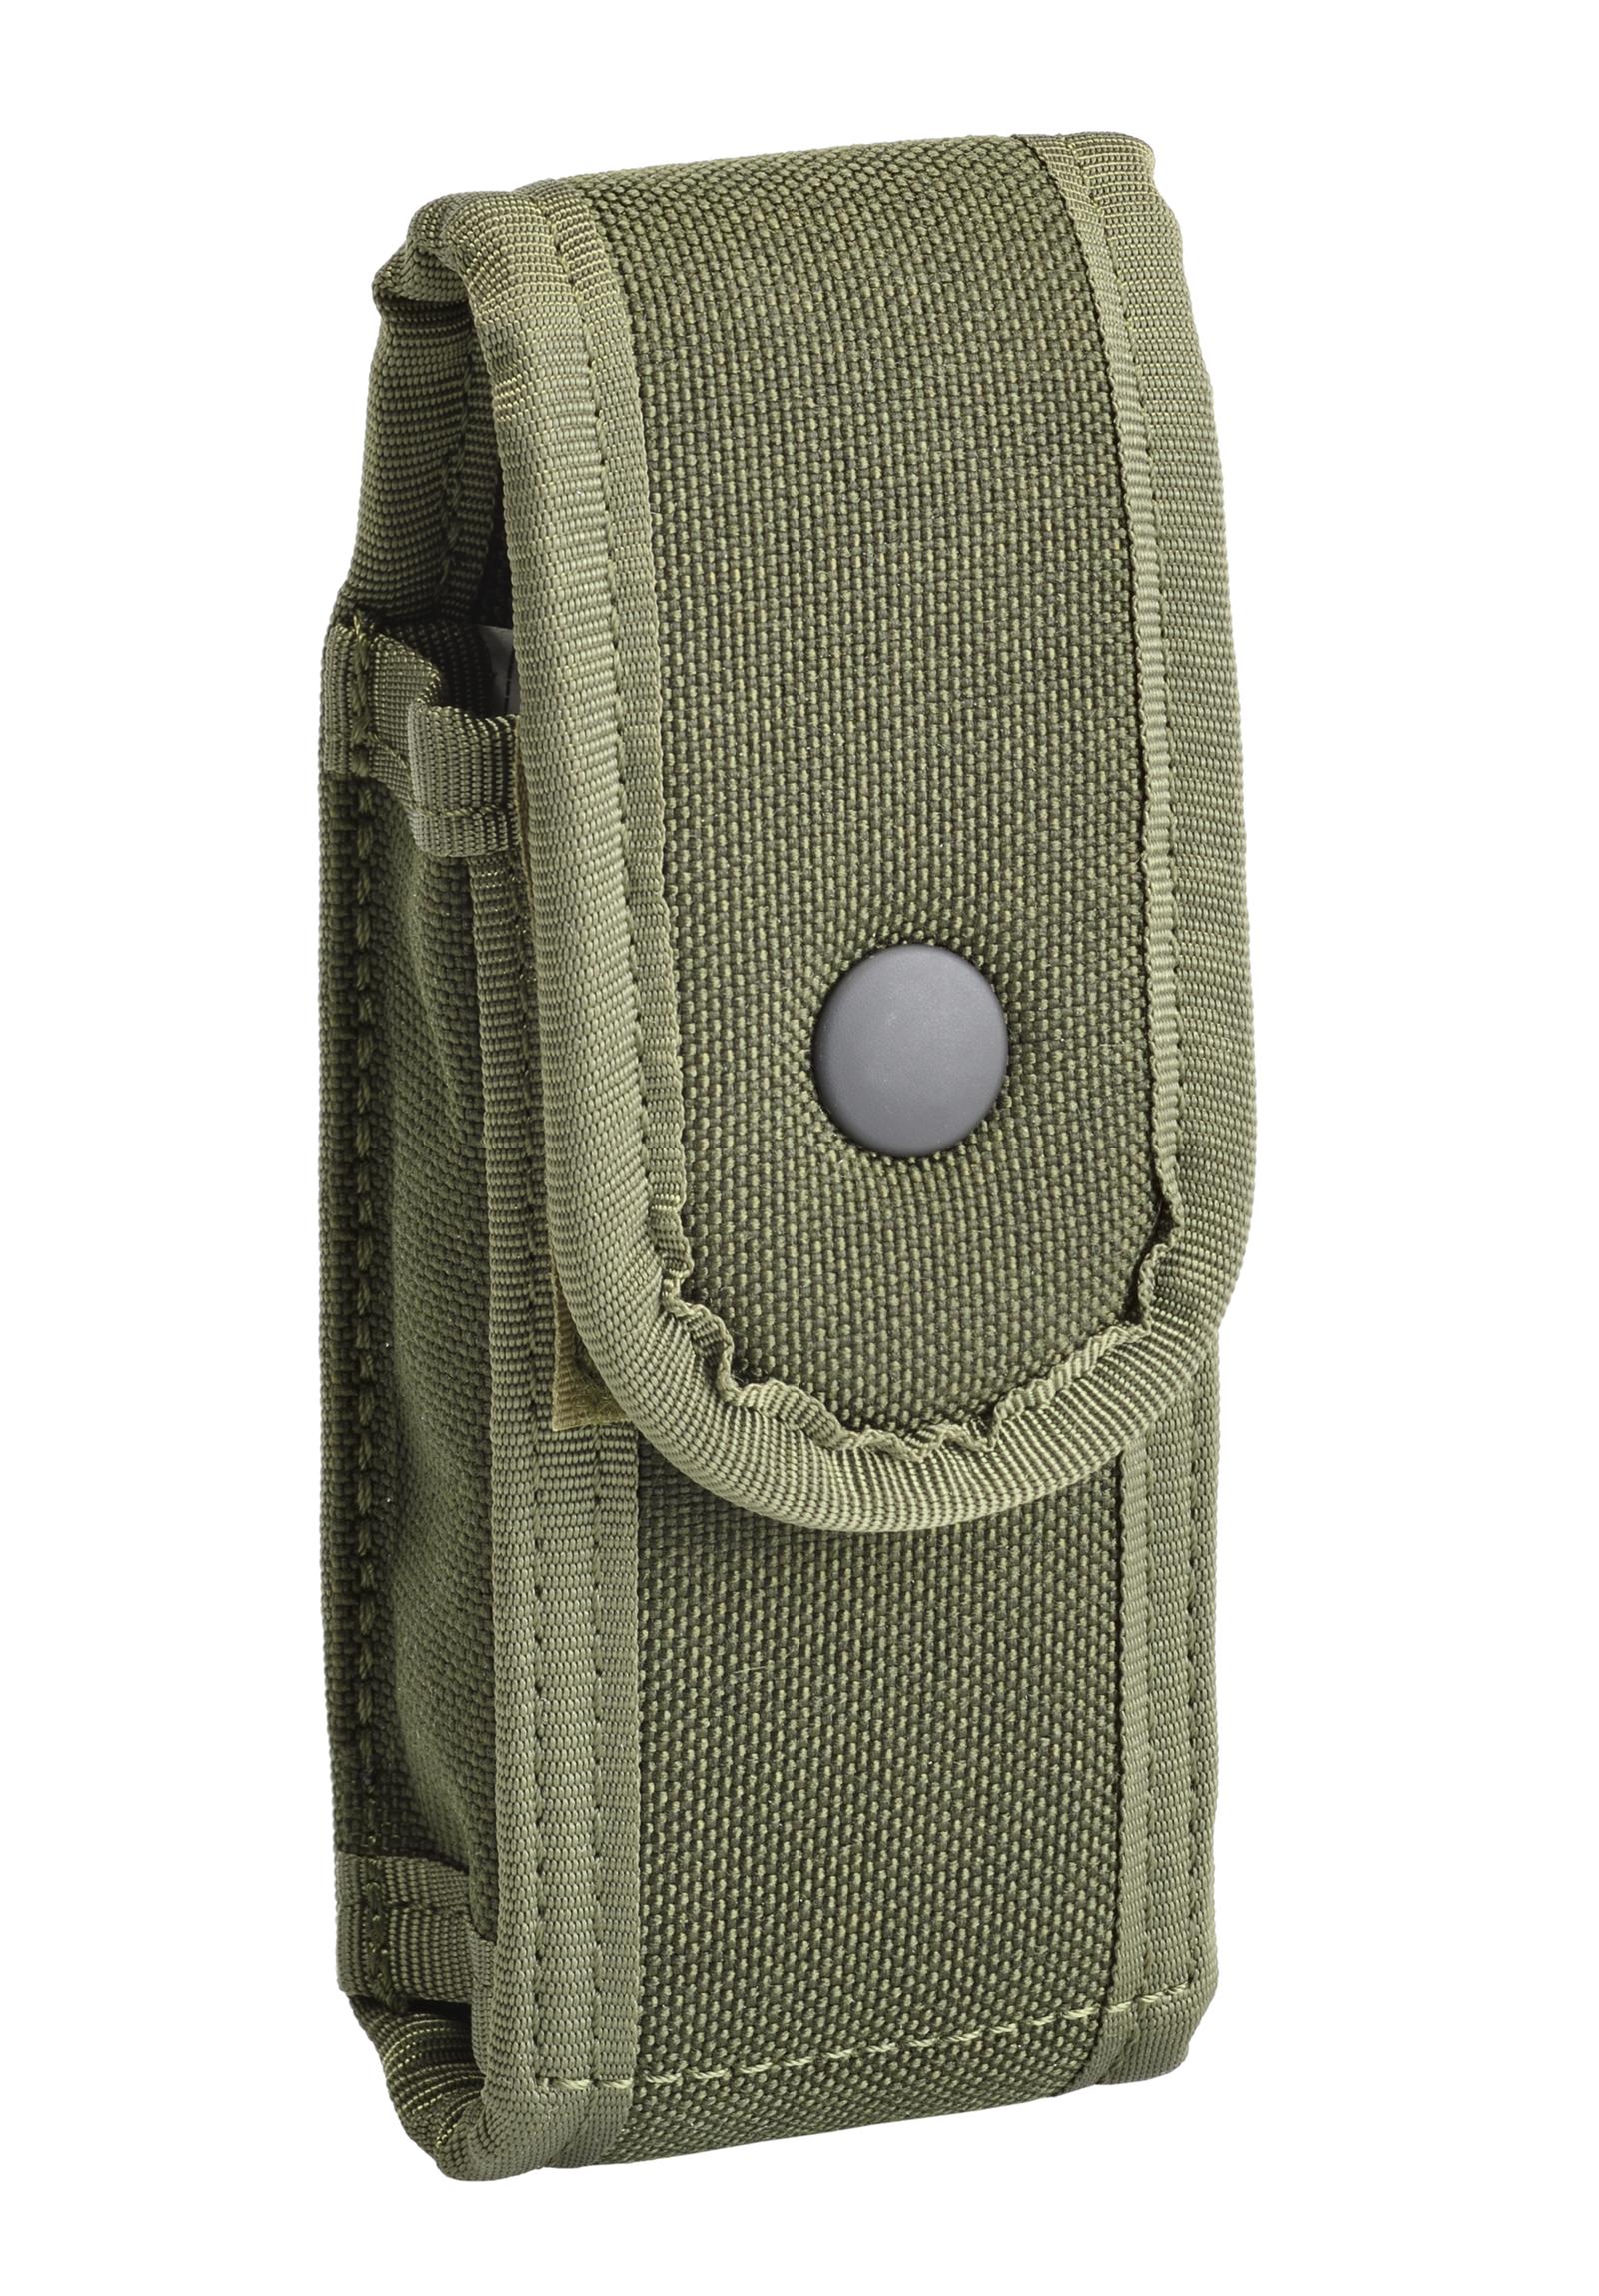 BERETTA 92-A1 DOUBLE-MAGAZINE POUCH BY ACE CASE ***100 MADE IN U.S.A.*** 